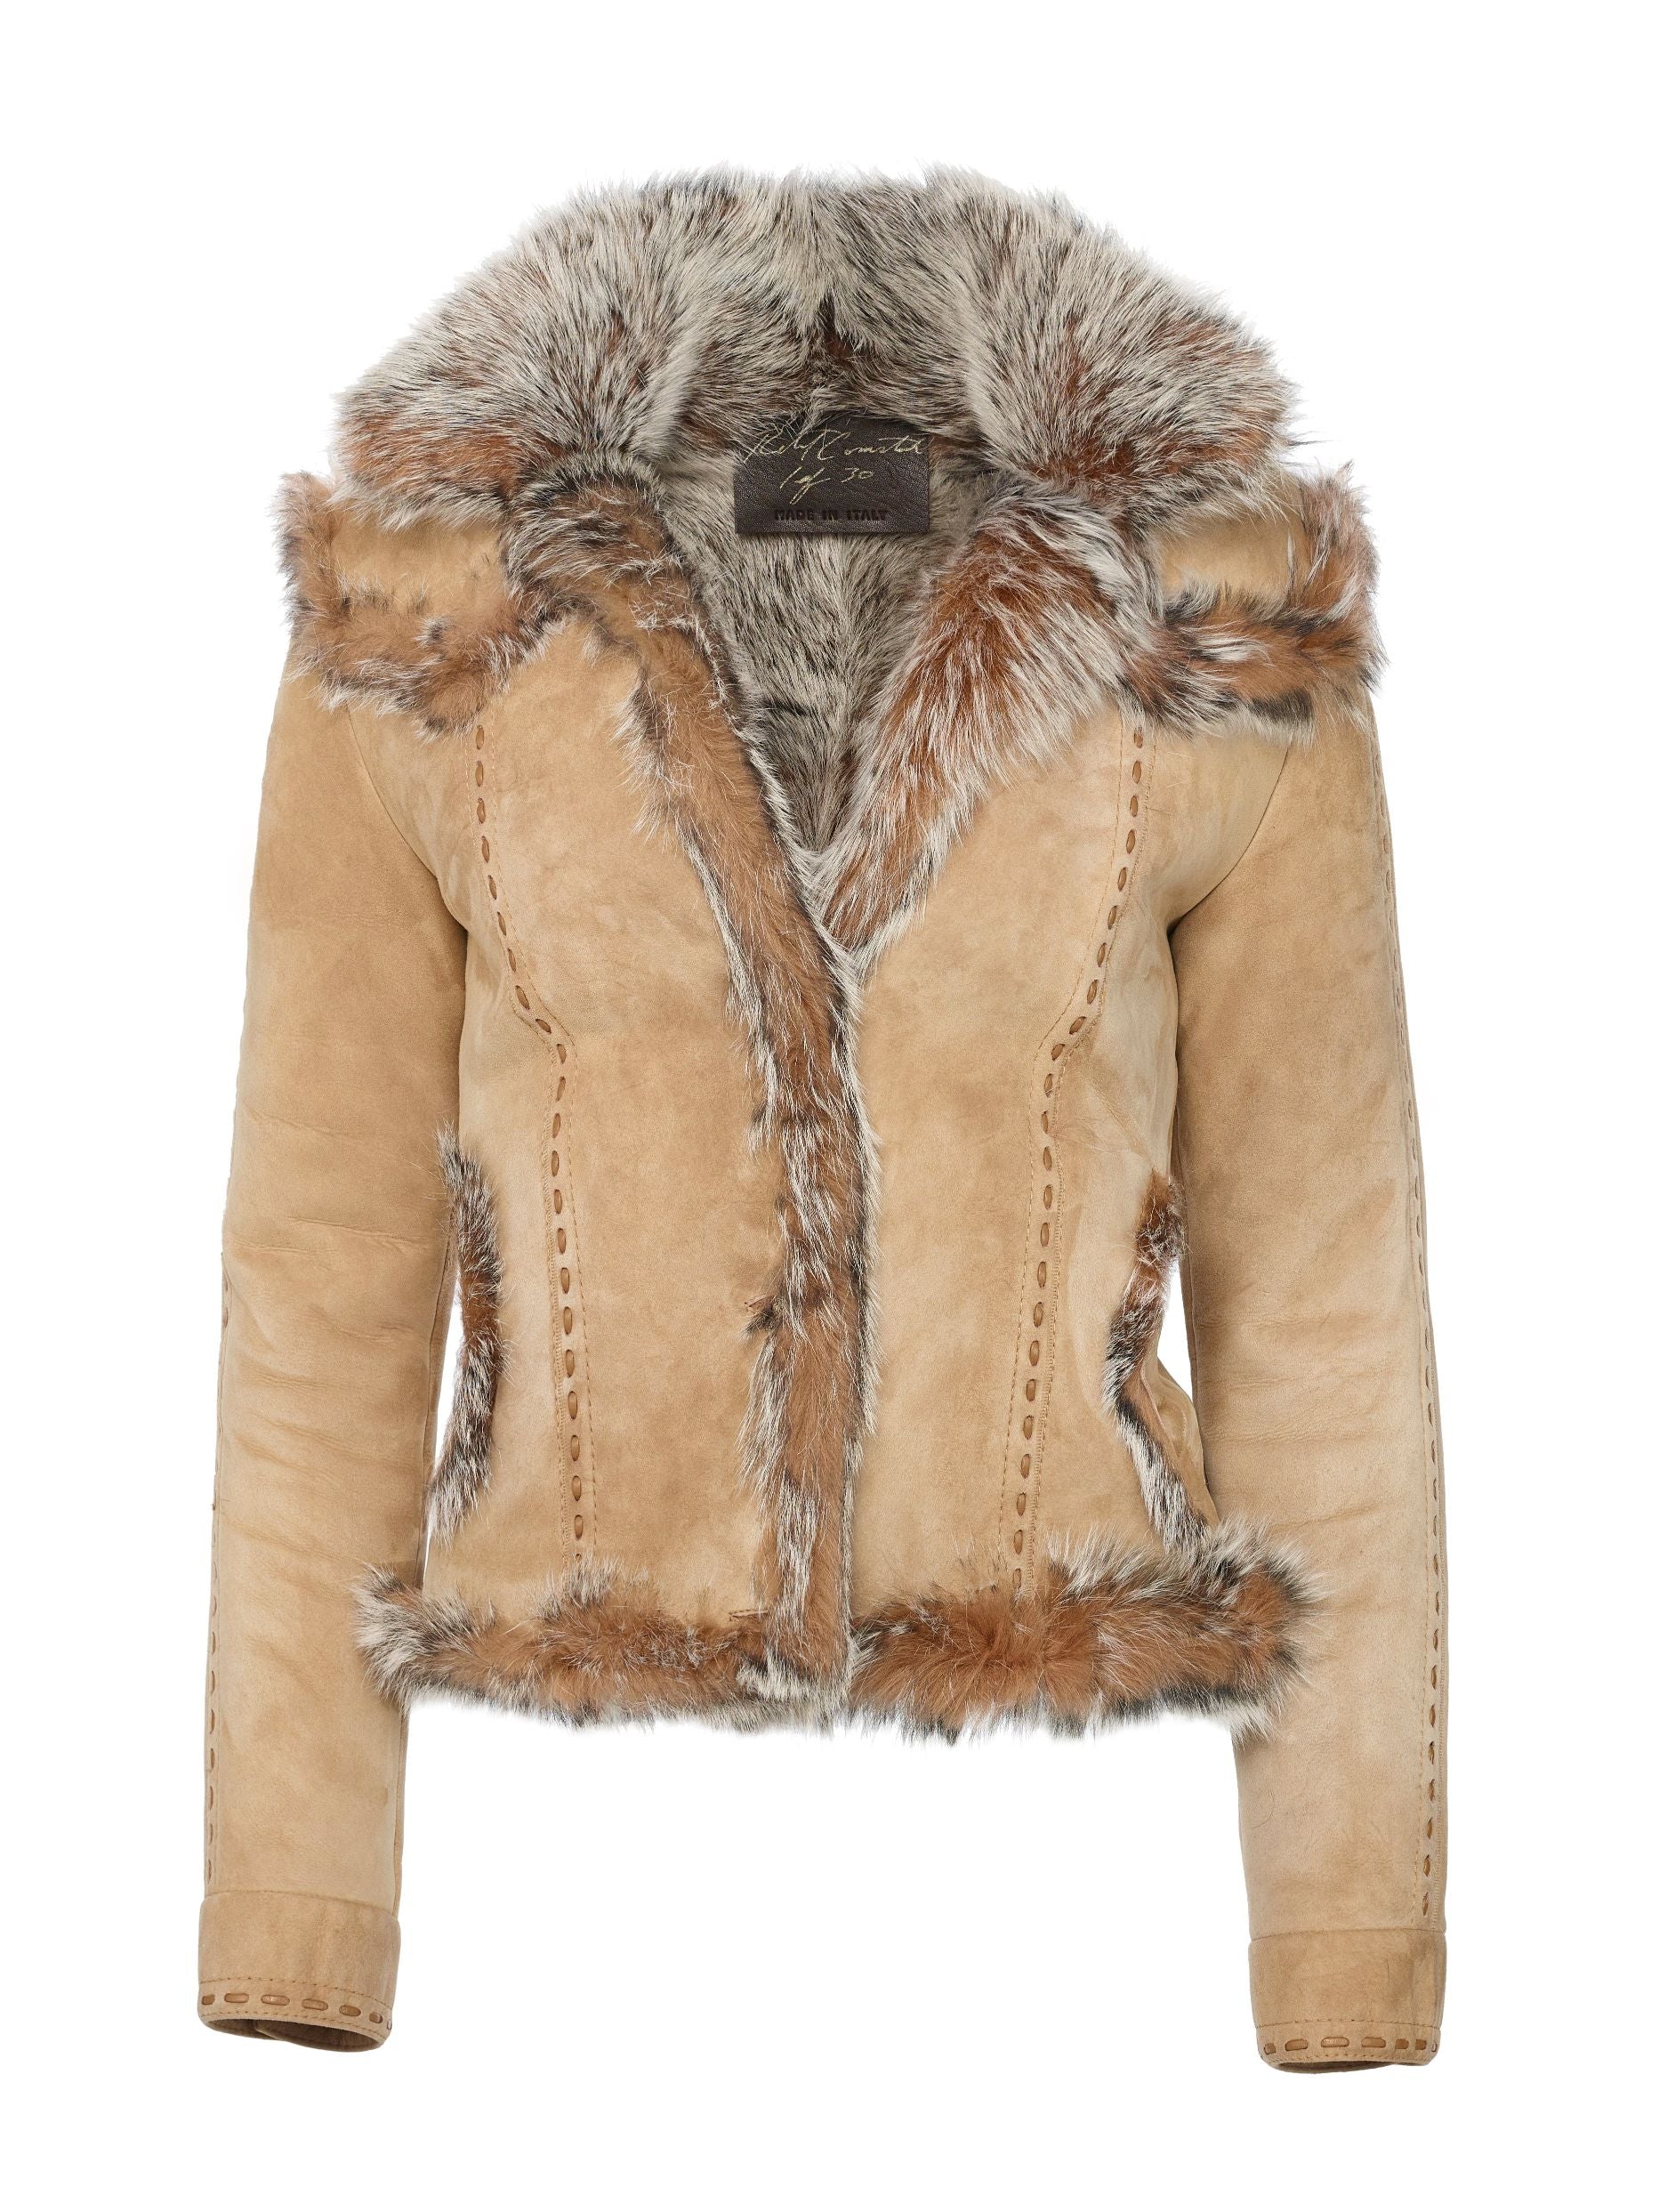 Powder touch suede, hand-braided leather and self-fleece lining is the quintessential aprè ski creation